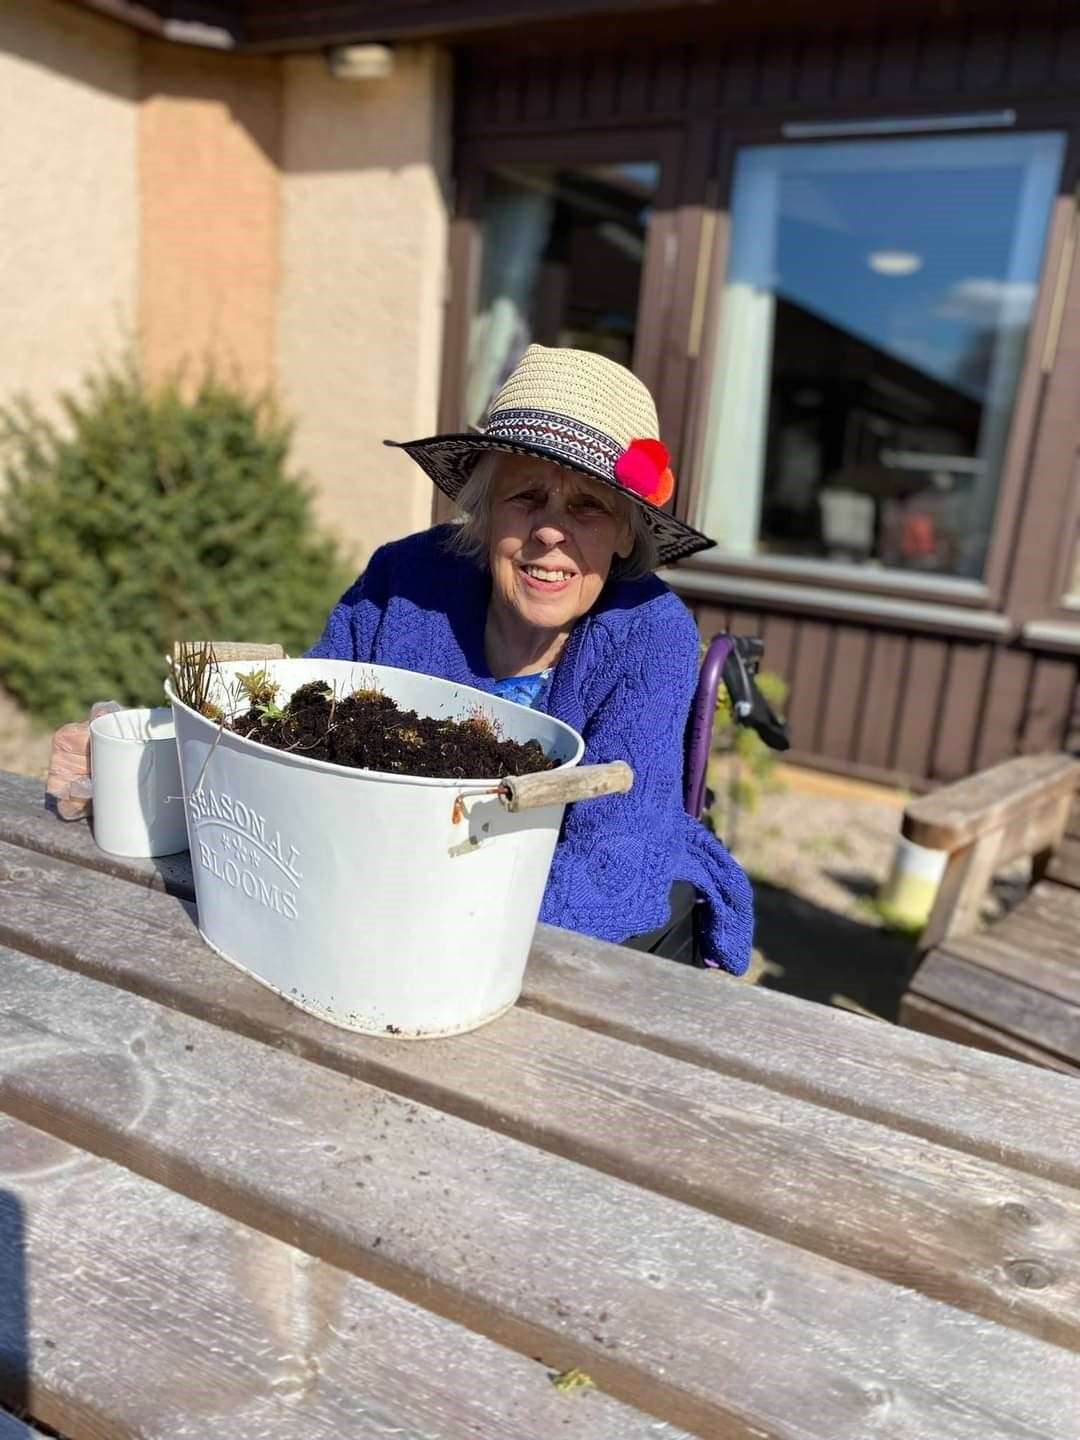 Cally Miller enjoying a cup of tea after sowing seeds in her planter.